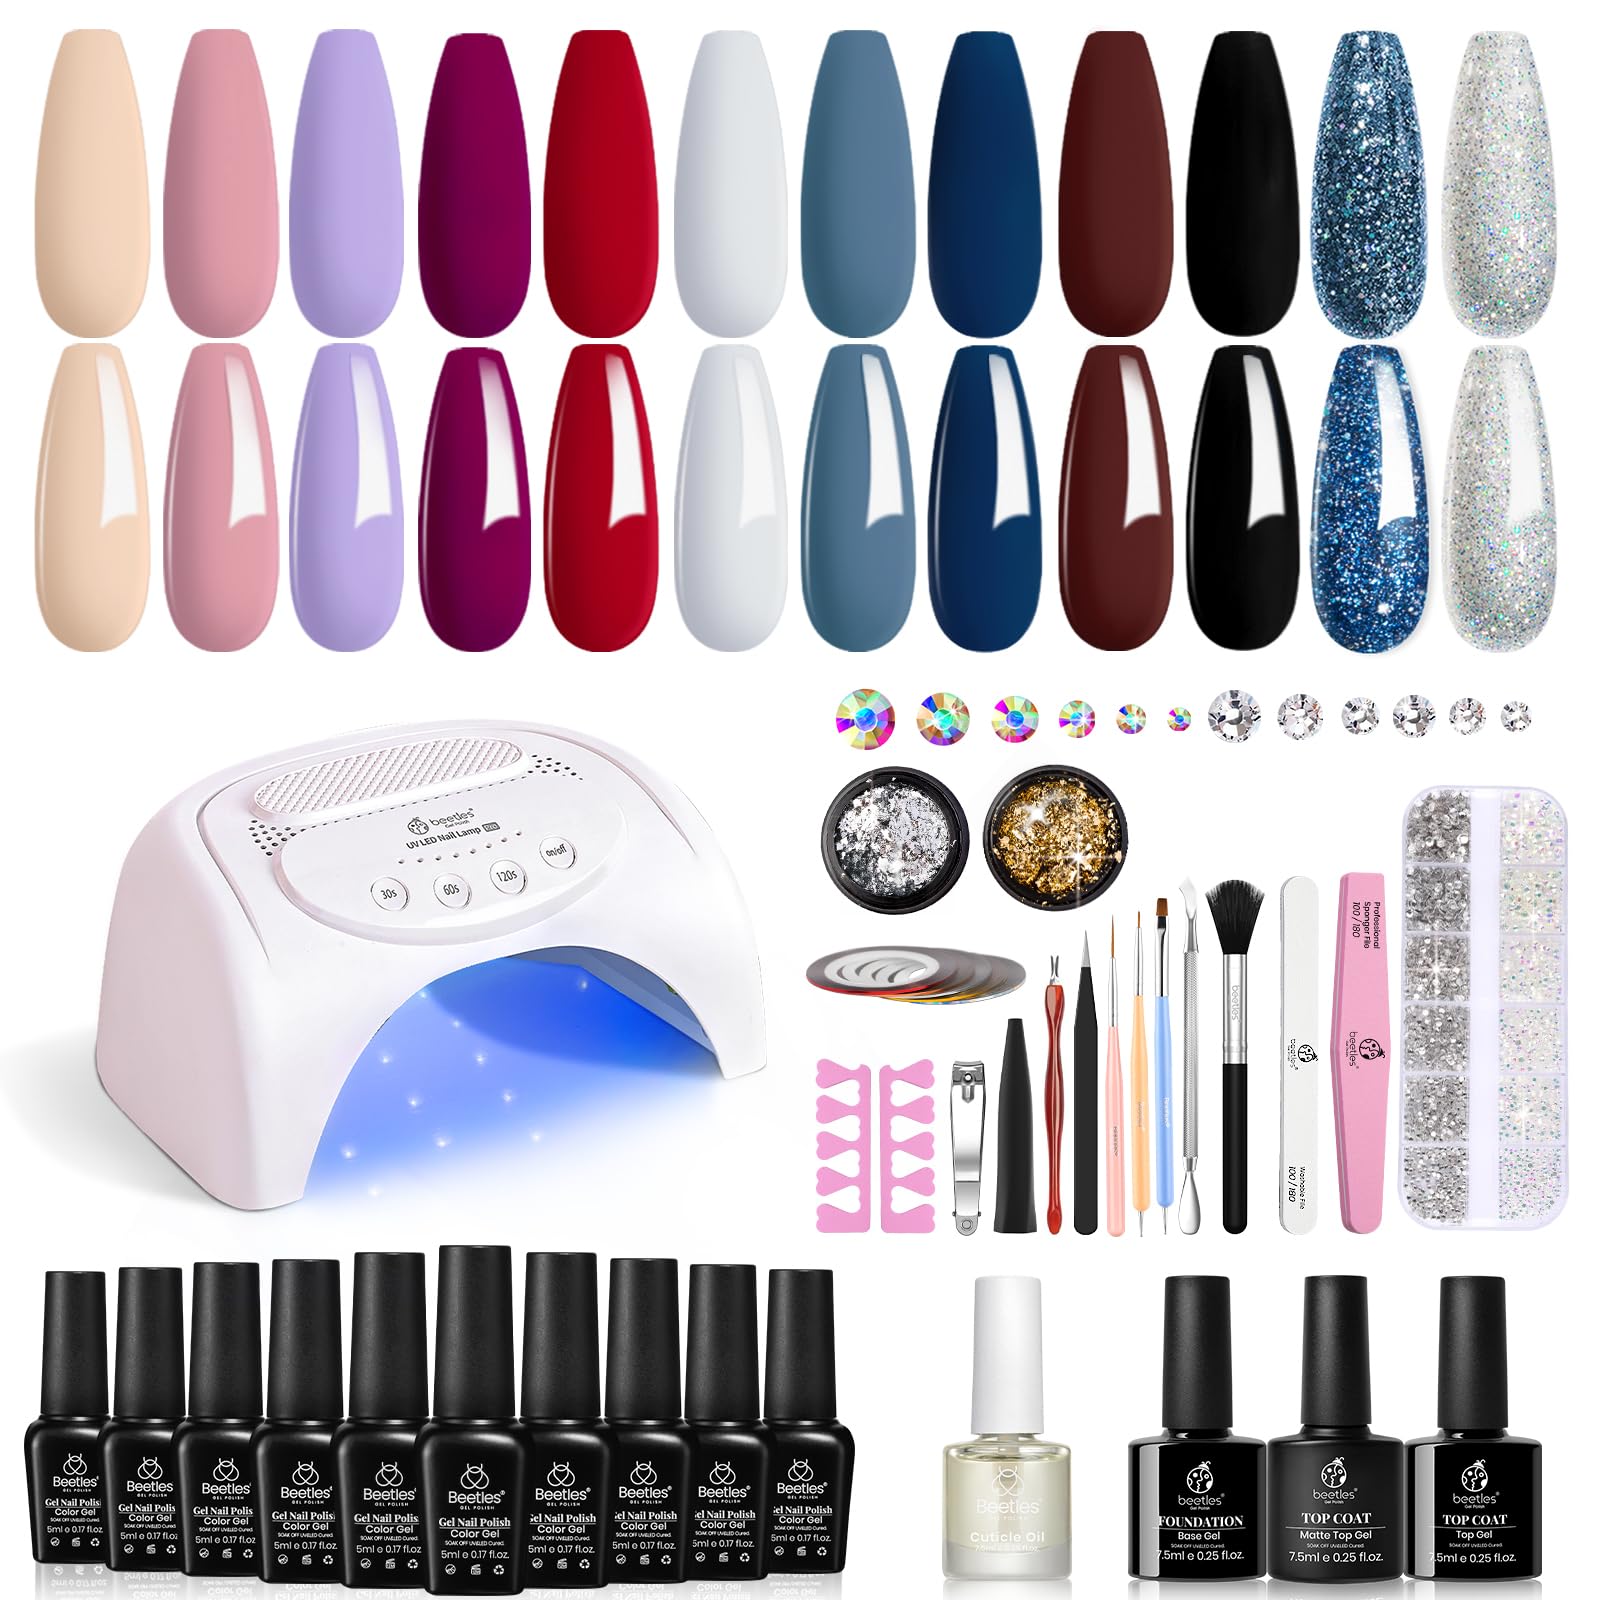 All-in-one Nails Starter Kit #053